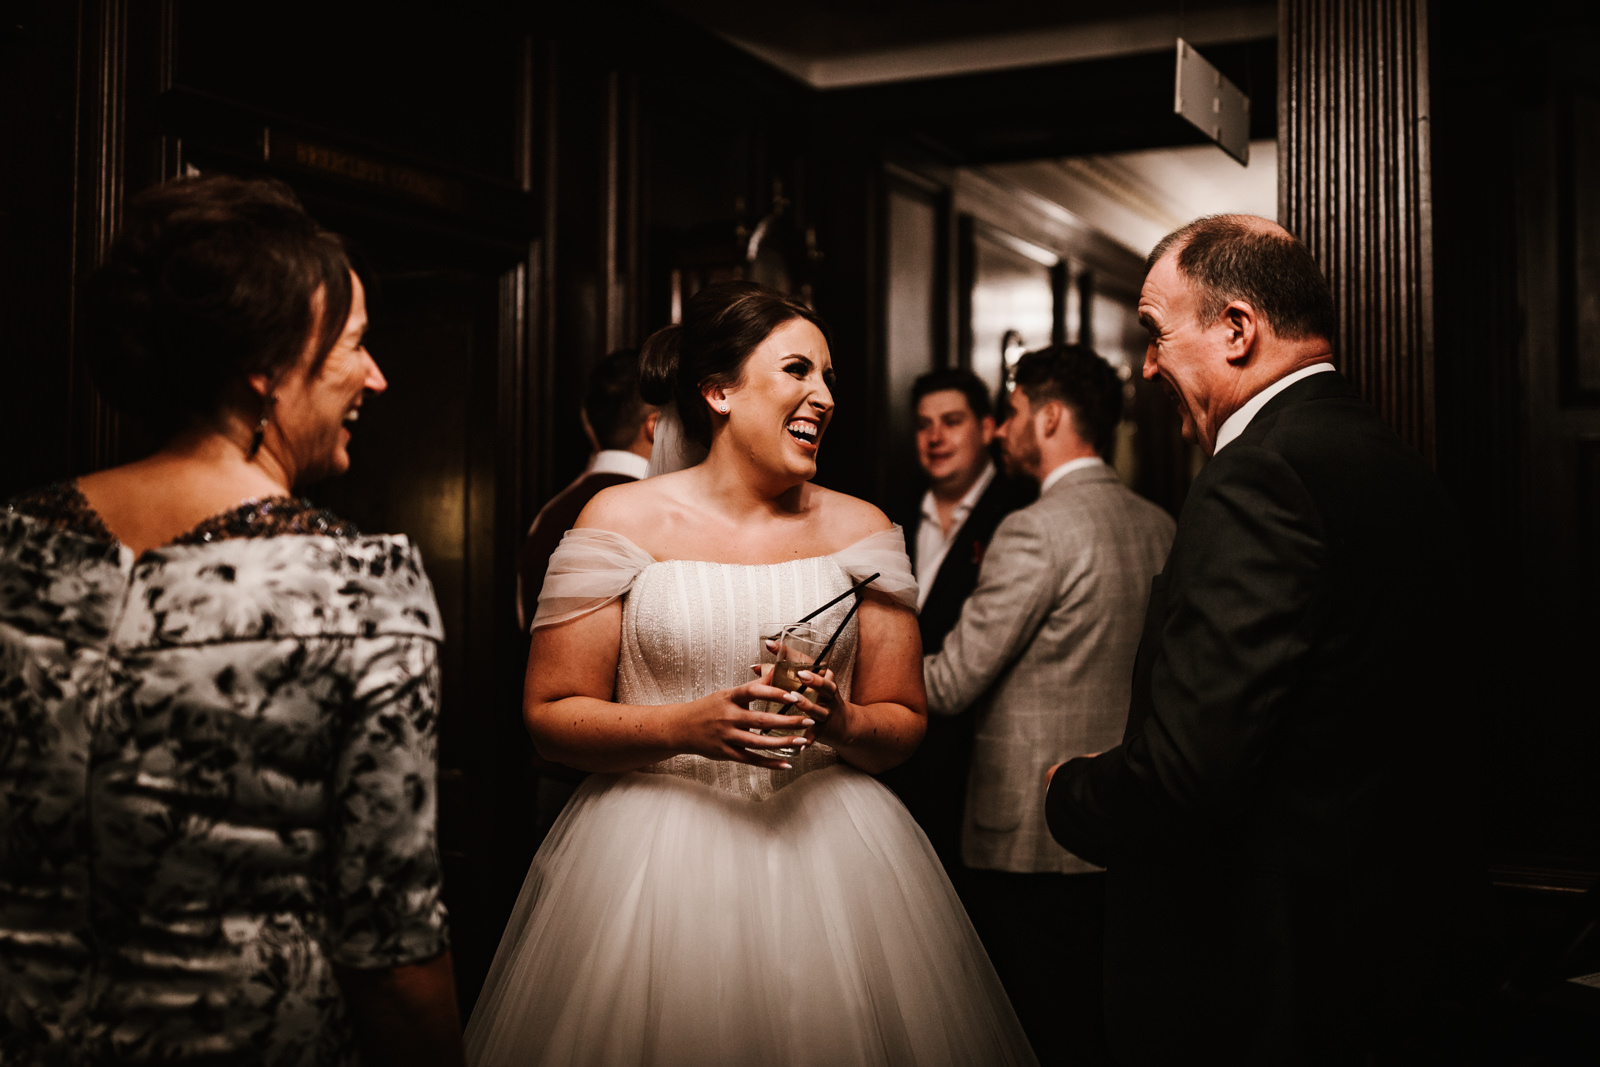 Bride chatting to guests